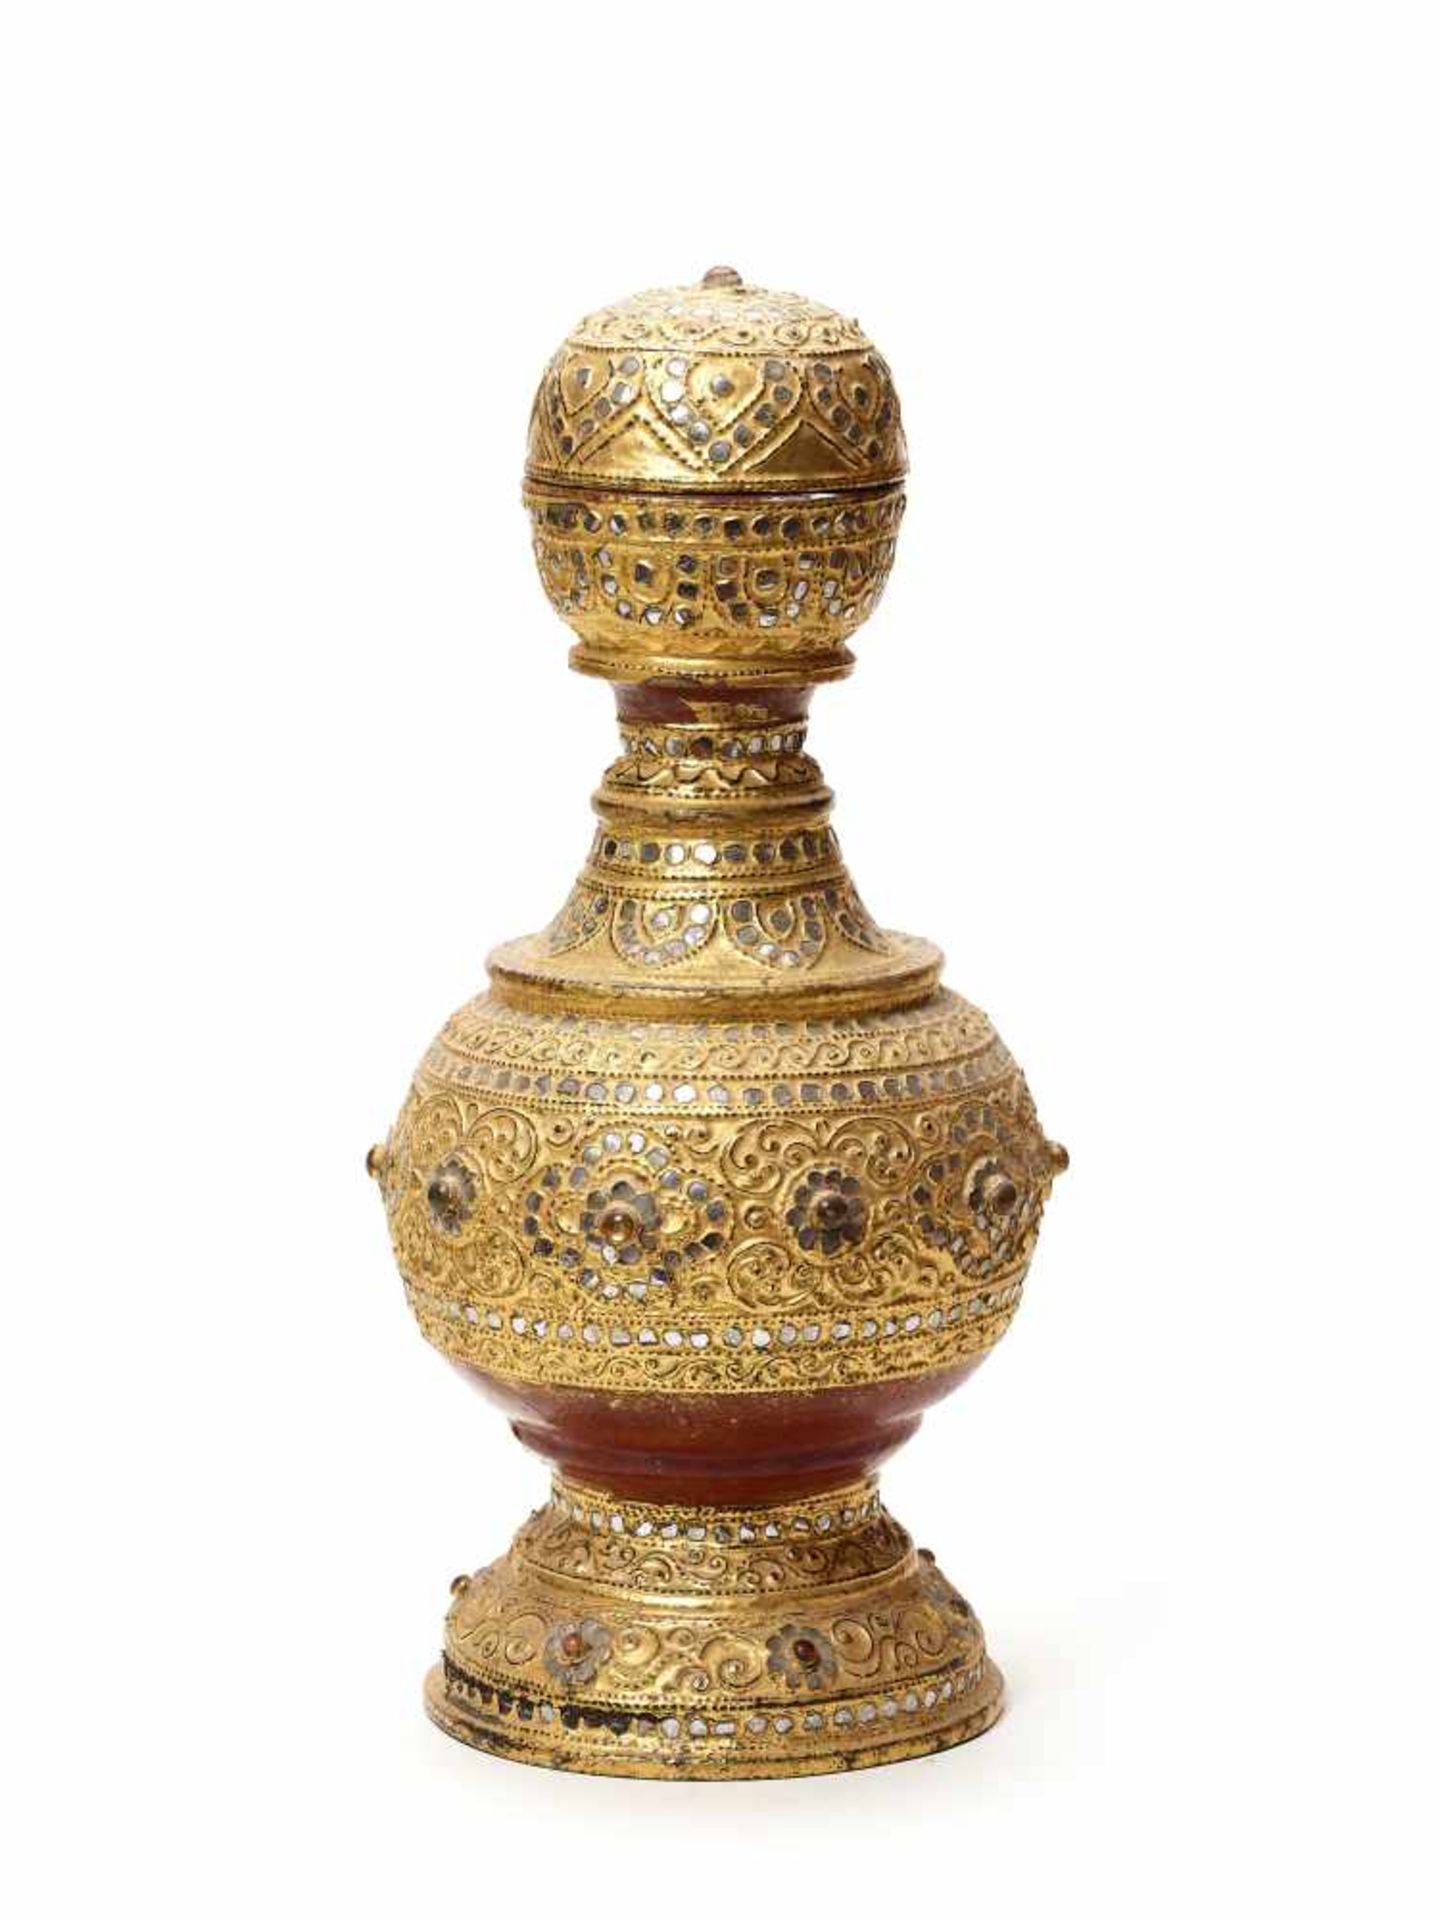 A BURMESE MANDALAY-STYLE LACQUER GILT WOOD LIDDED VESSEL IN THE SHAPE OF A PAGODAWood, gold and